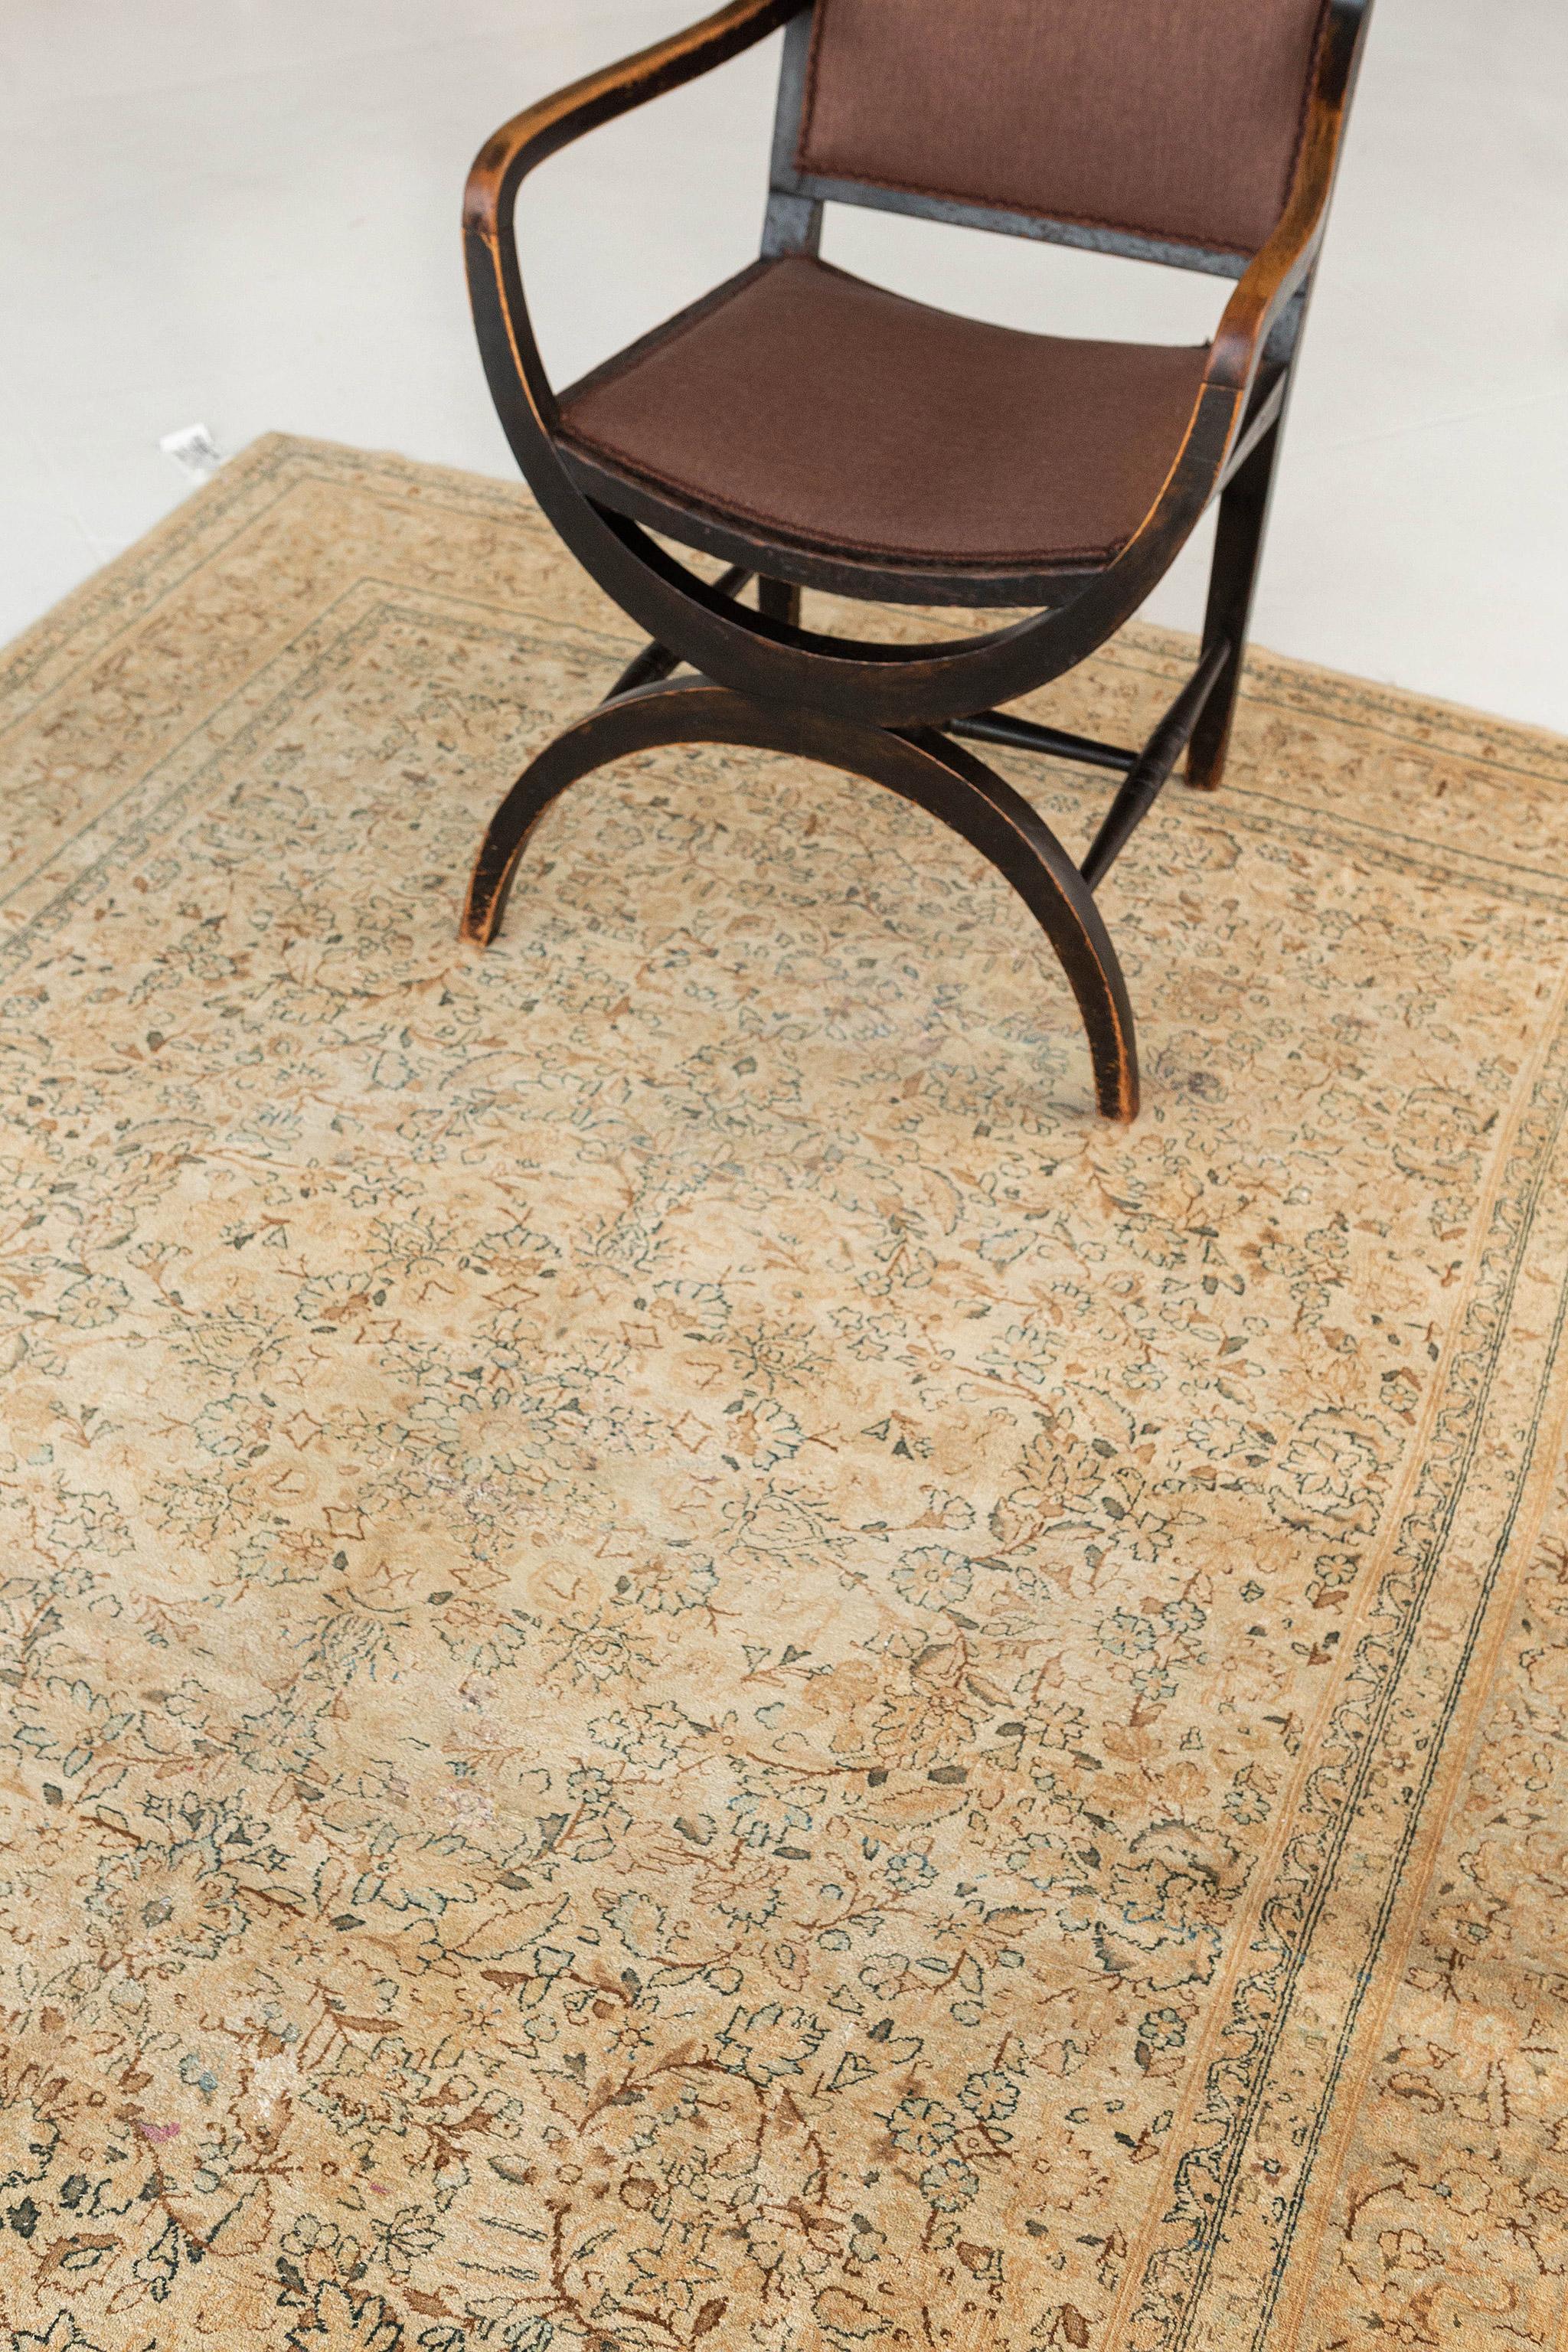 Classically composed and boasting a truly magnificent all-over garden design, this antique Persian Kerman rug reflects the finer points of timeless Central Asian rug trends. A variety of botanical elements, blossoms and vines are elegantly spread